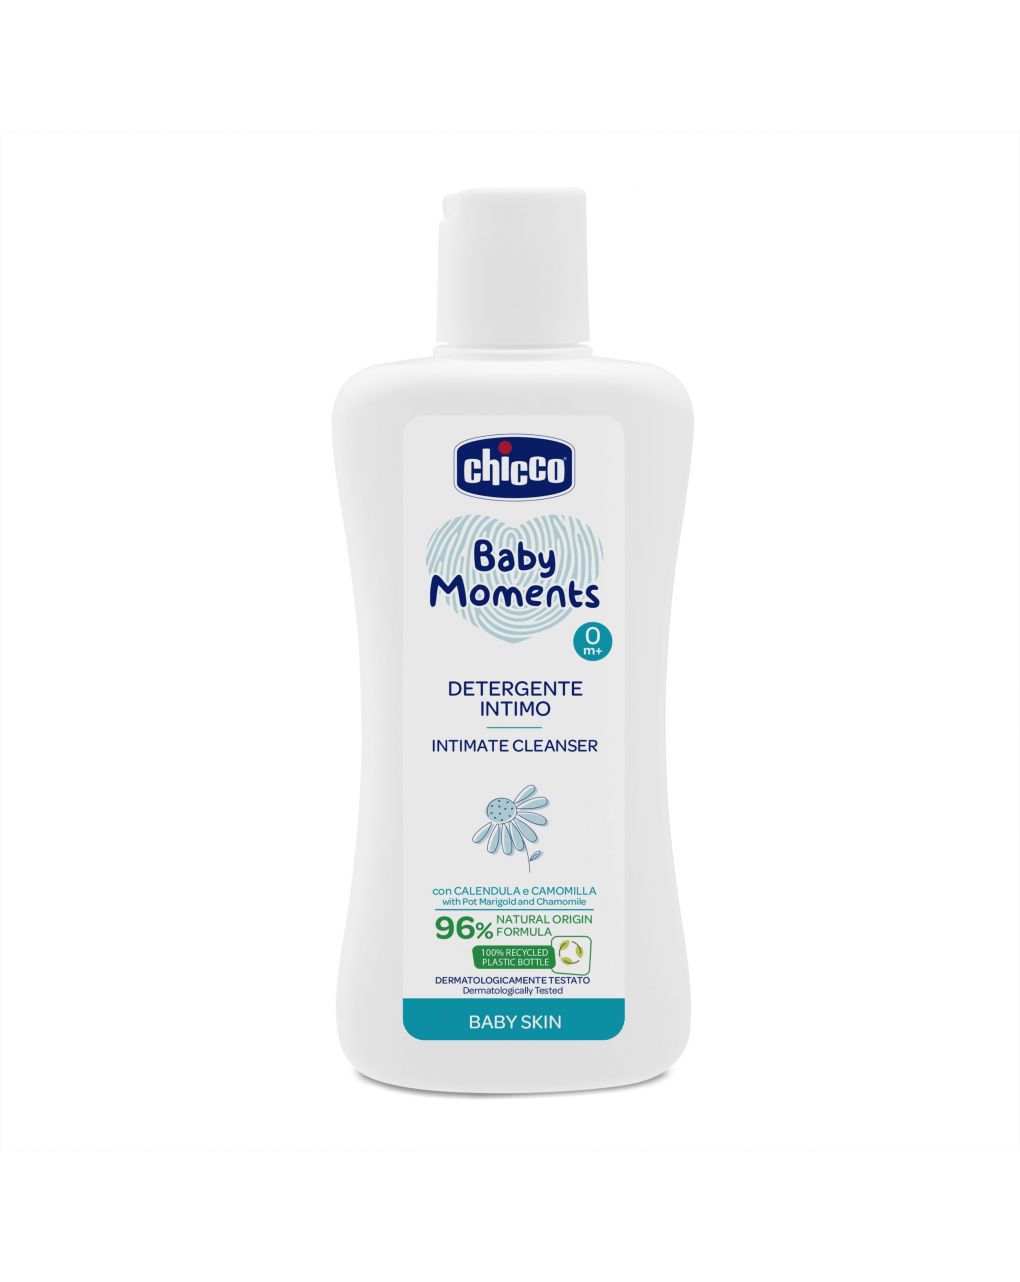 Baby moments detergente intimo chicco baby skin - Chicco